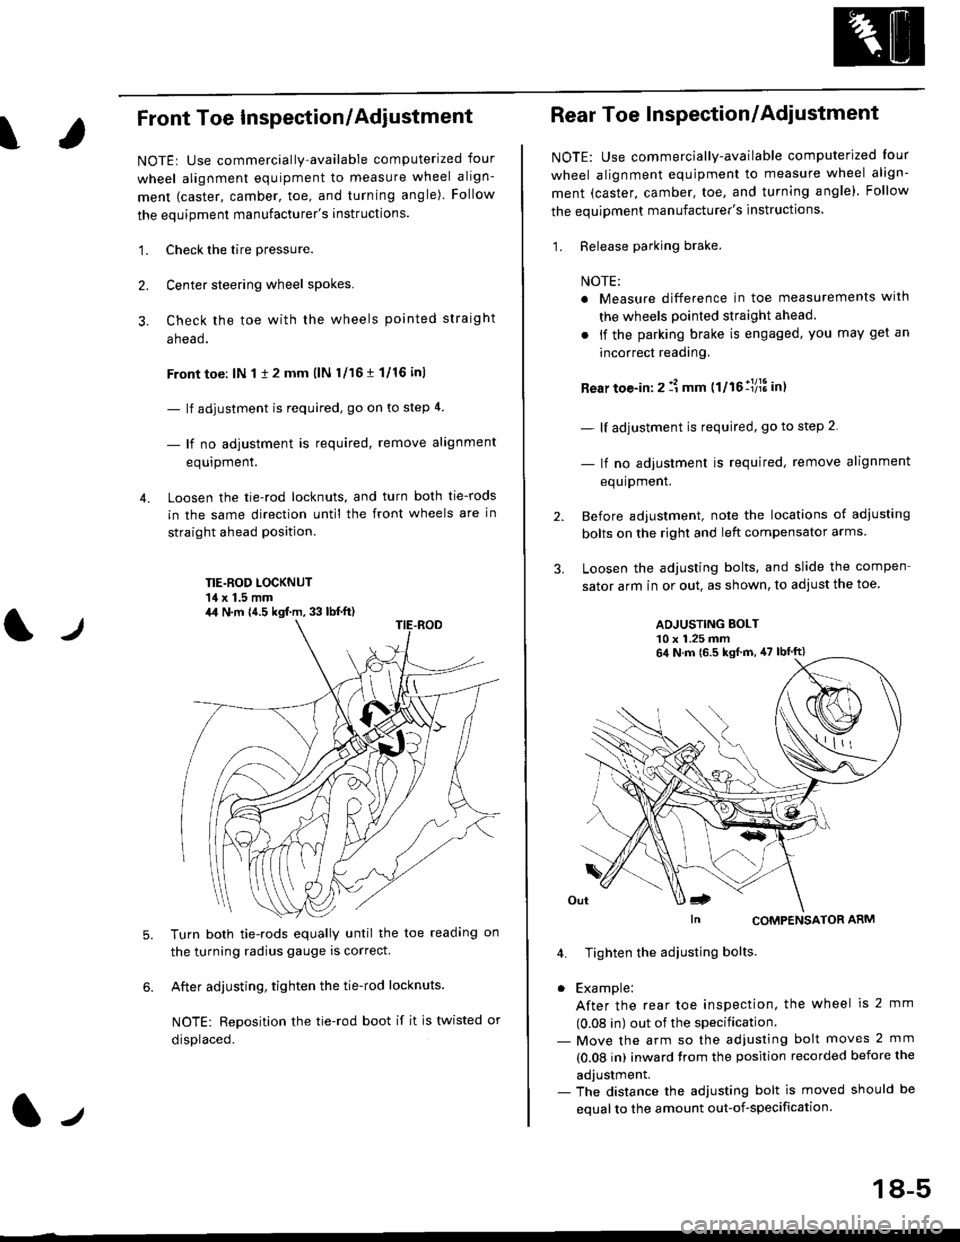 HONDA CIVIC 1997 6.G Owners Guide ?
Front Toe Inspection/Adiustment
NOTE: Use commercially-available computerized four
wheel alignment equipment to measure wheel align-
ment (caster, camber, toe, and turning angle). Follow
the equipme